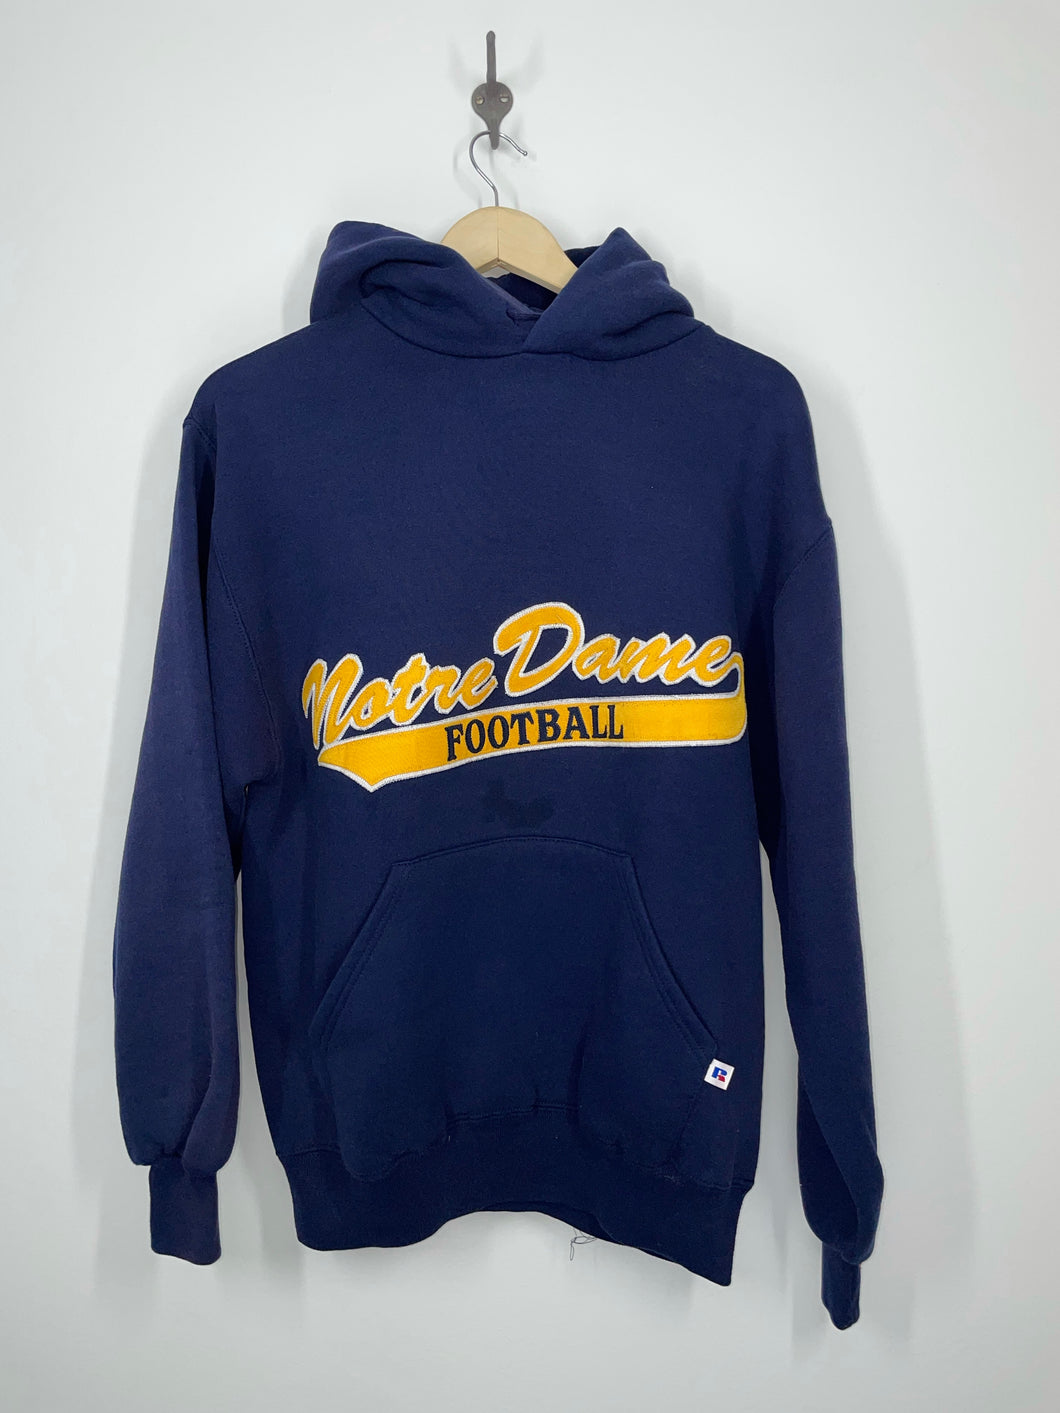 University of Notre Dame Football Embroidered Hoodie Sweatshirt - Russell - M